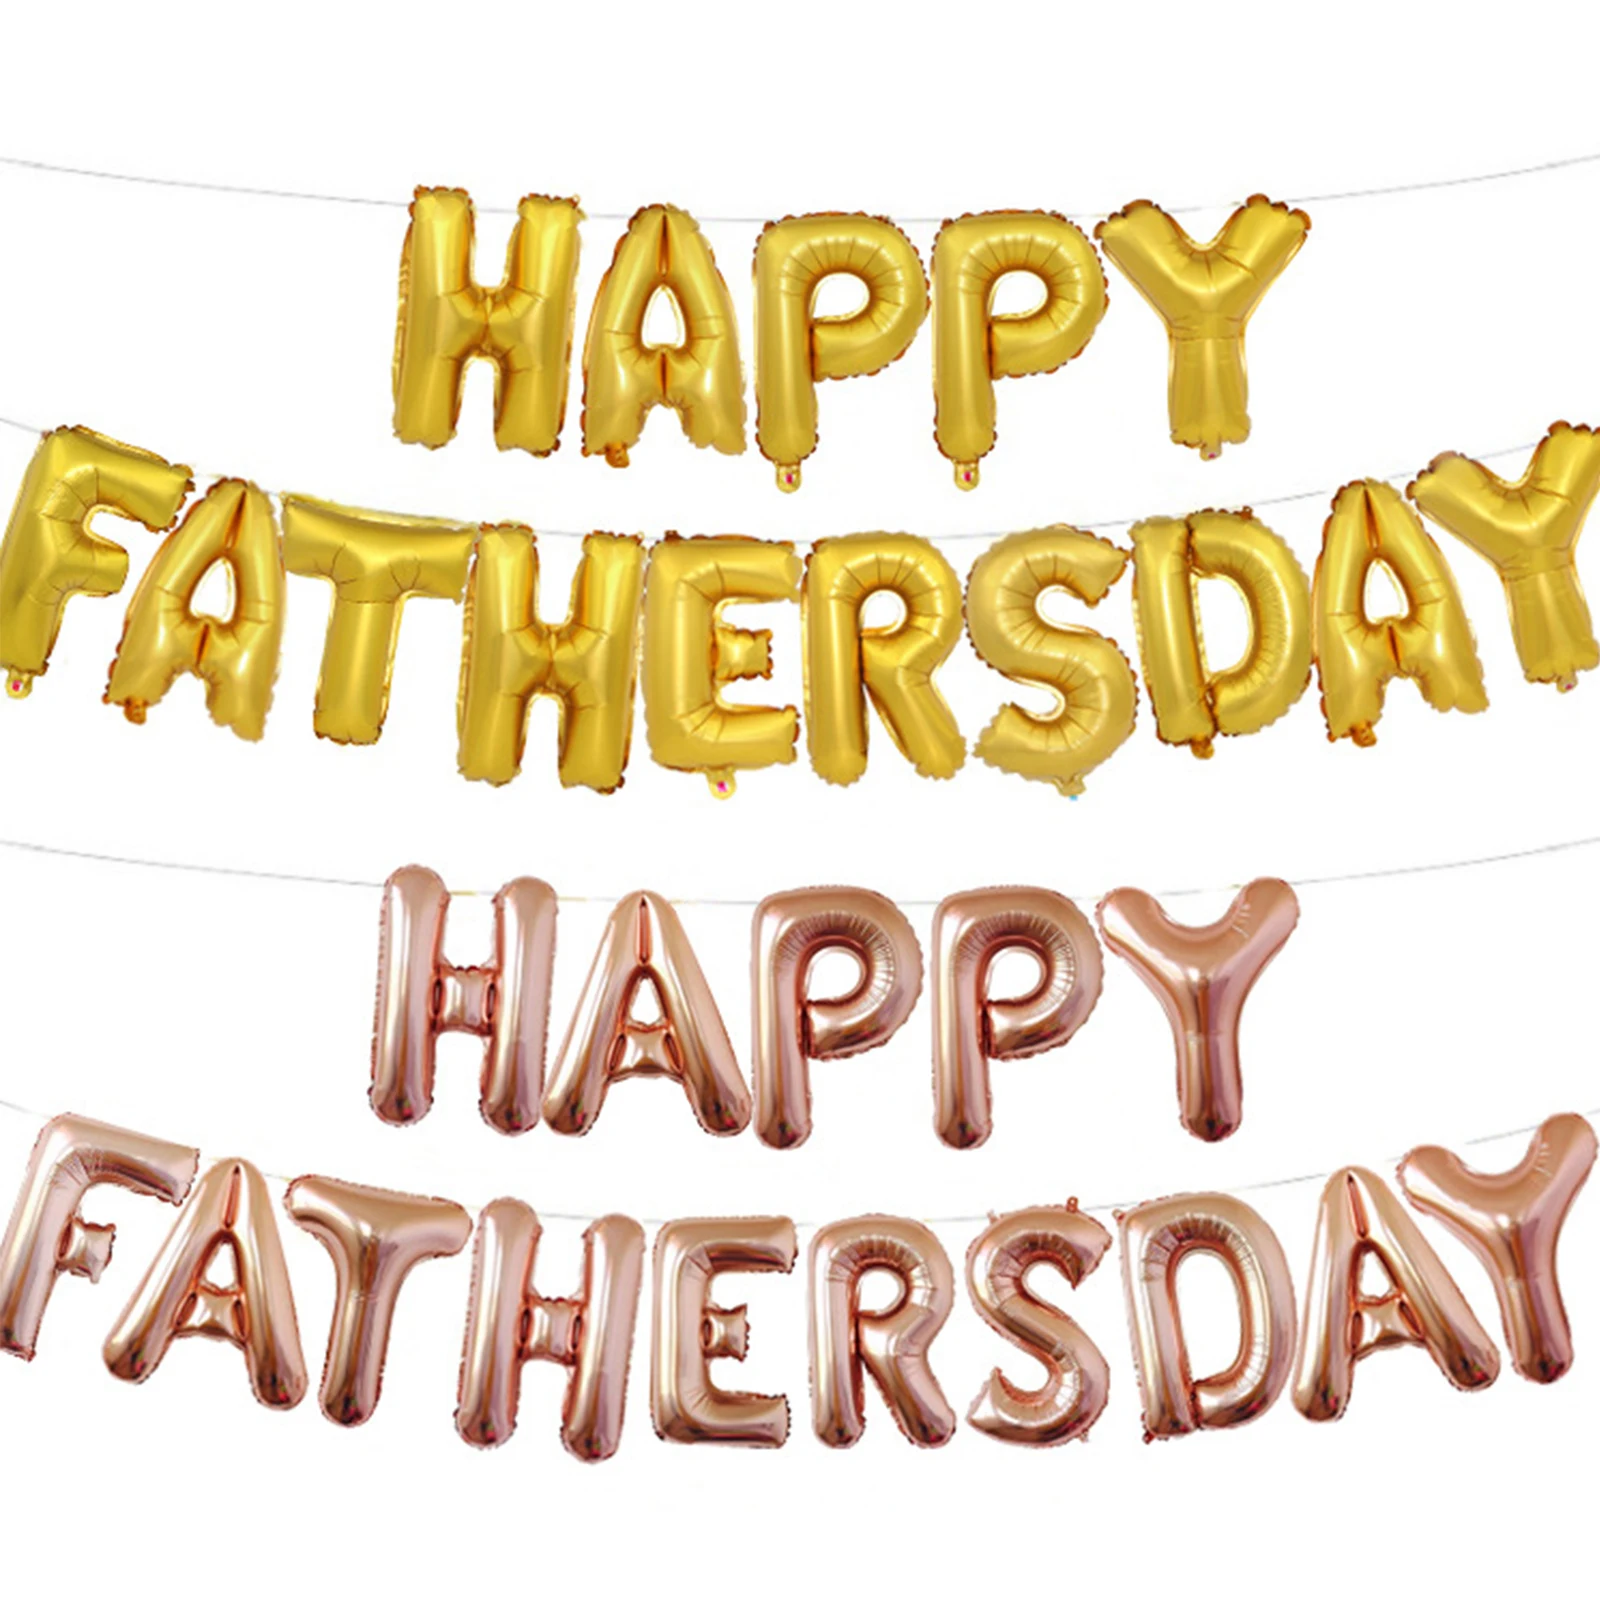 

Happy Fathers Mathers Day Aluminum Foil Balloon Letter Set father's Day Mother's Day Thanksgiving Party Wall Hanging Decoration